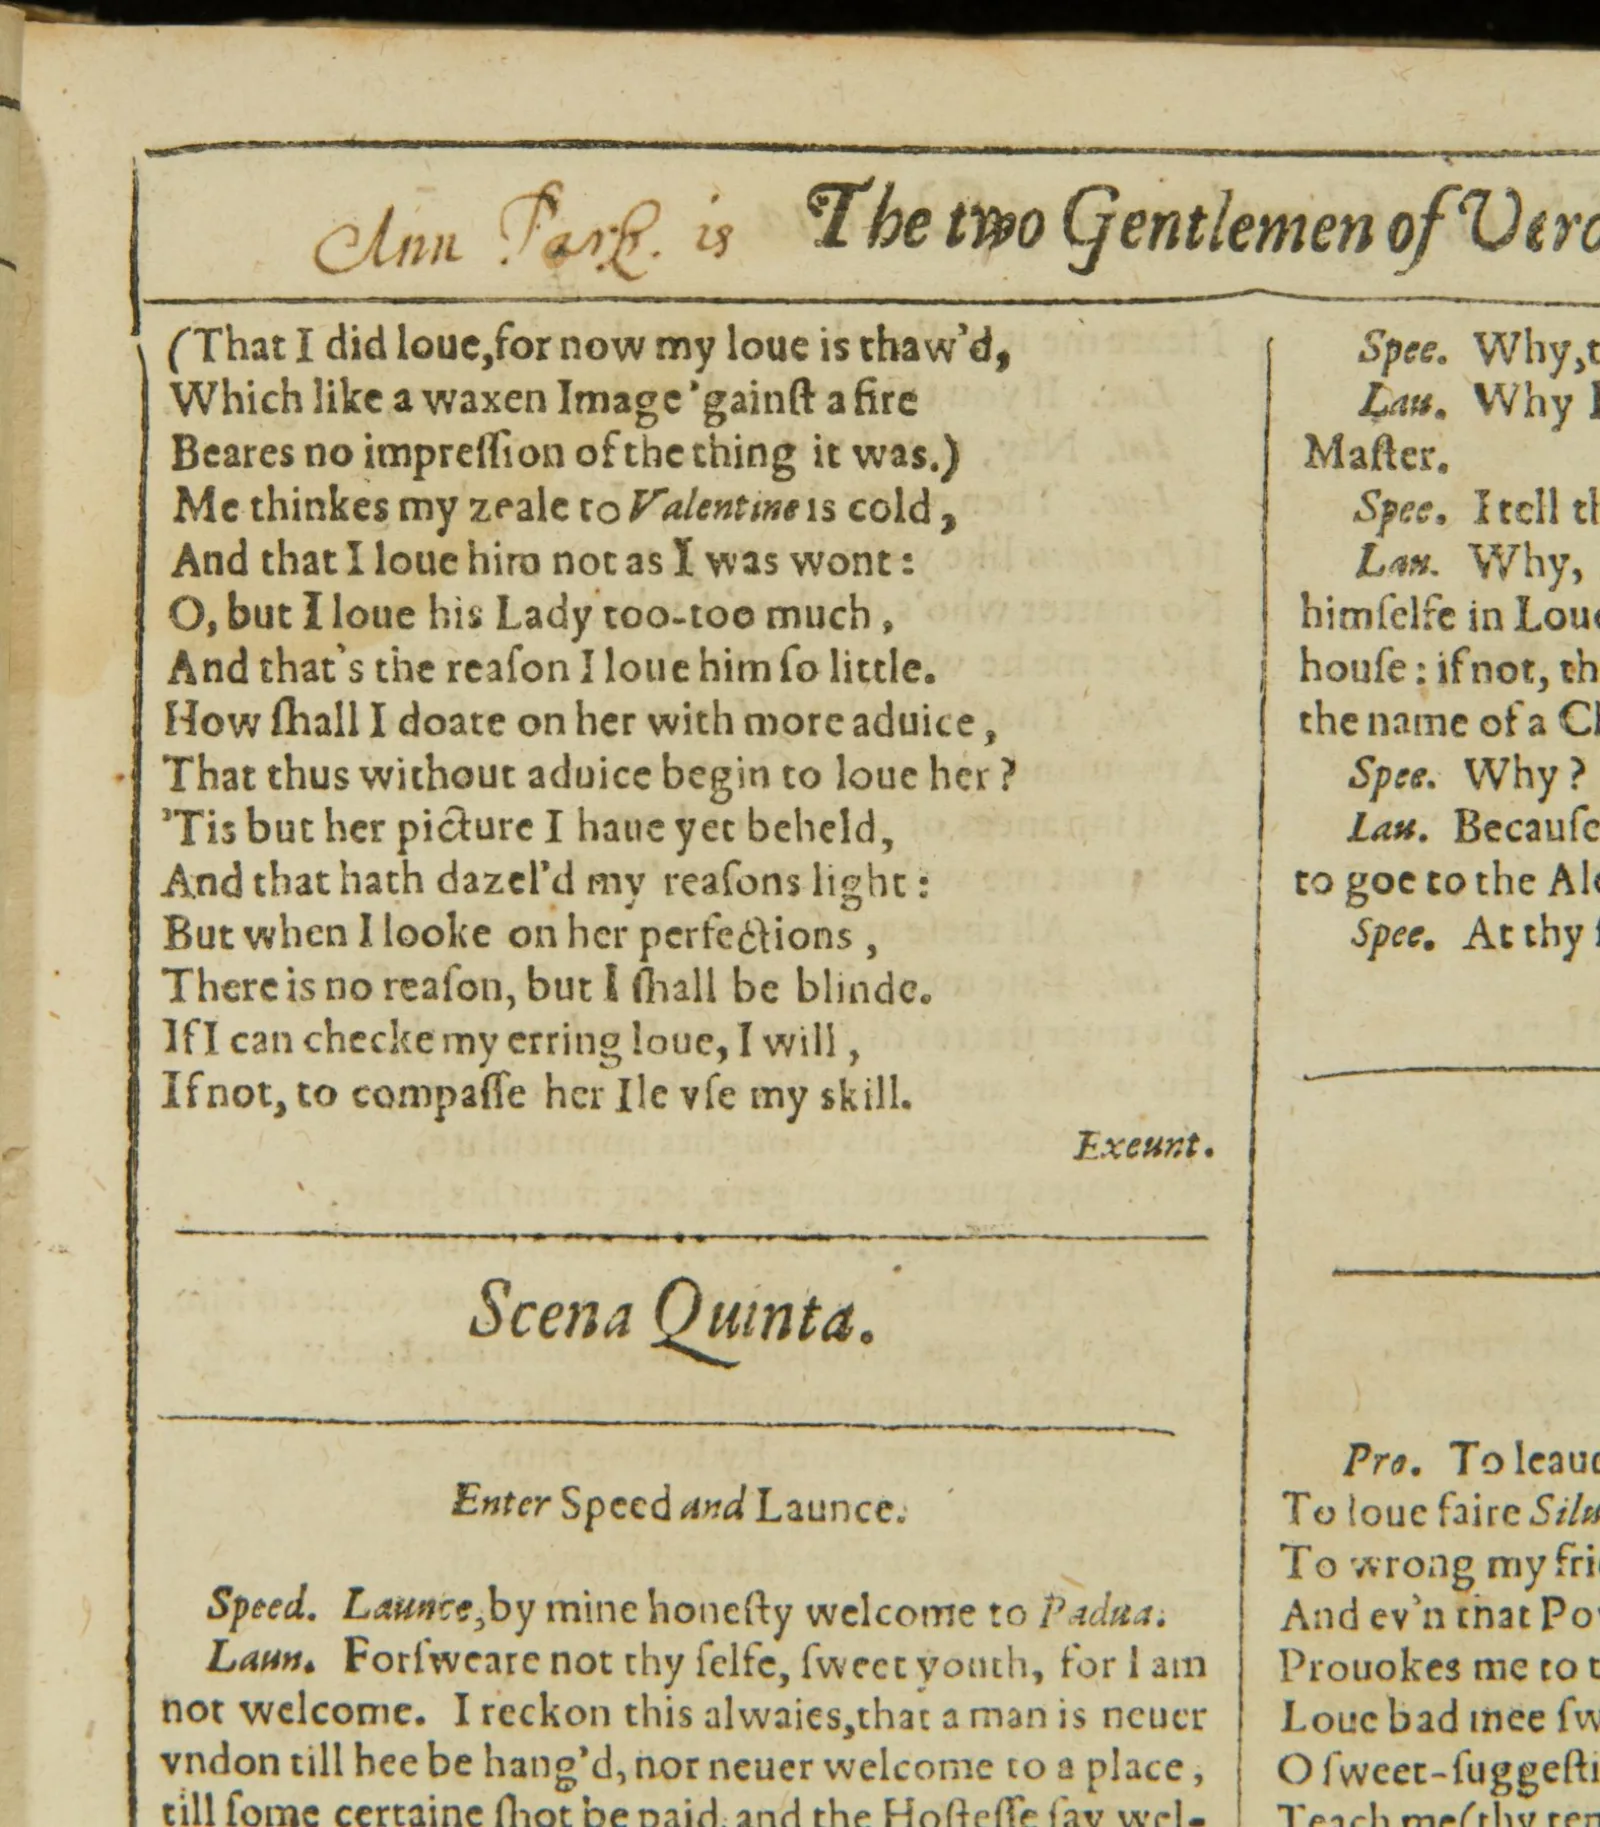 The words “Ann Park is” appear in handwriting in a page from the Shakespeare First Folio.